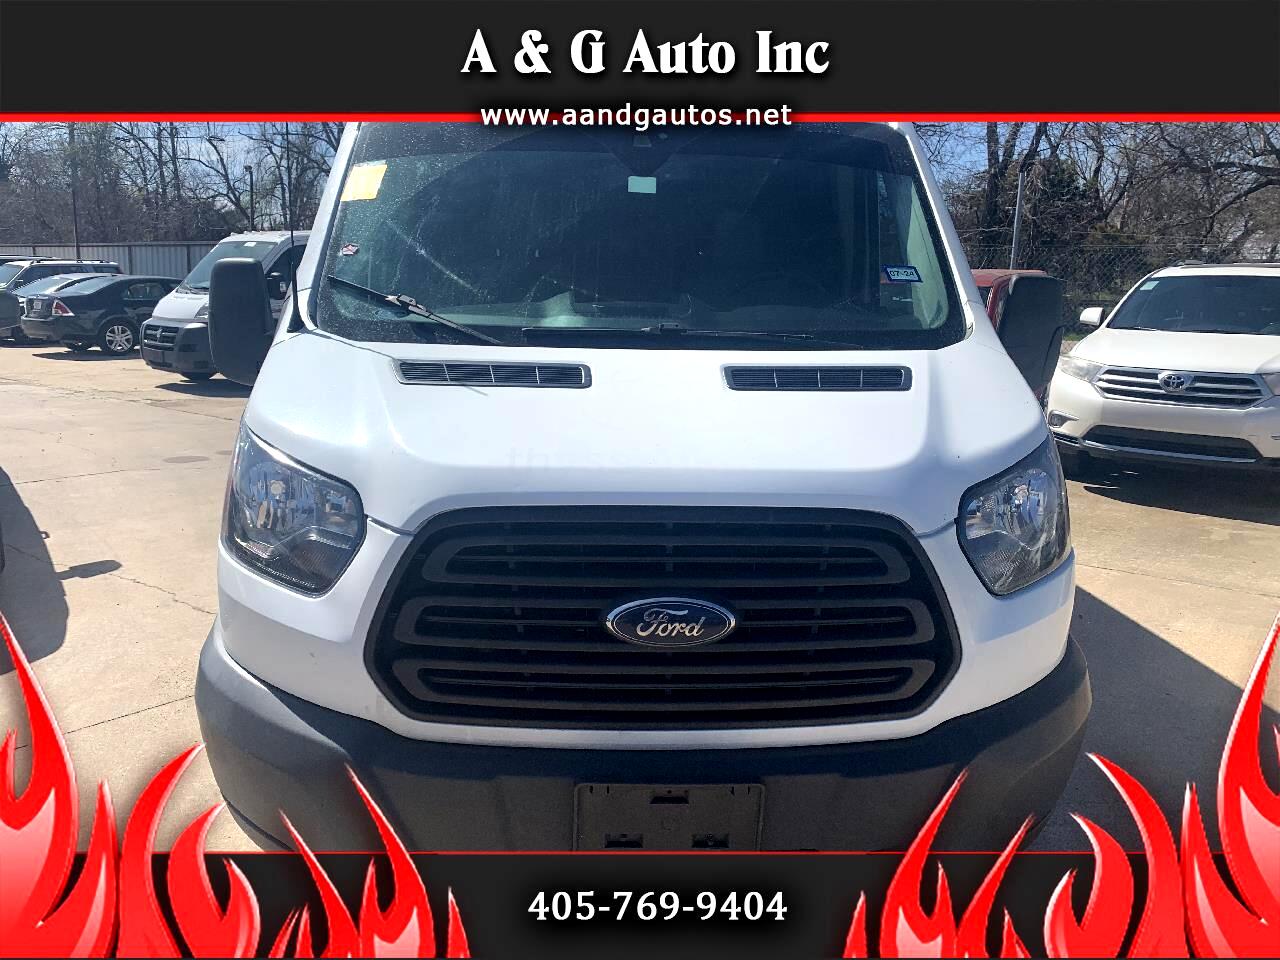 2018 Ford Transit for sale in Oklahoma City OK 73141 by A & G Auto Inc